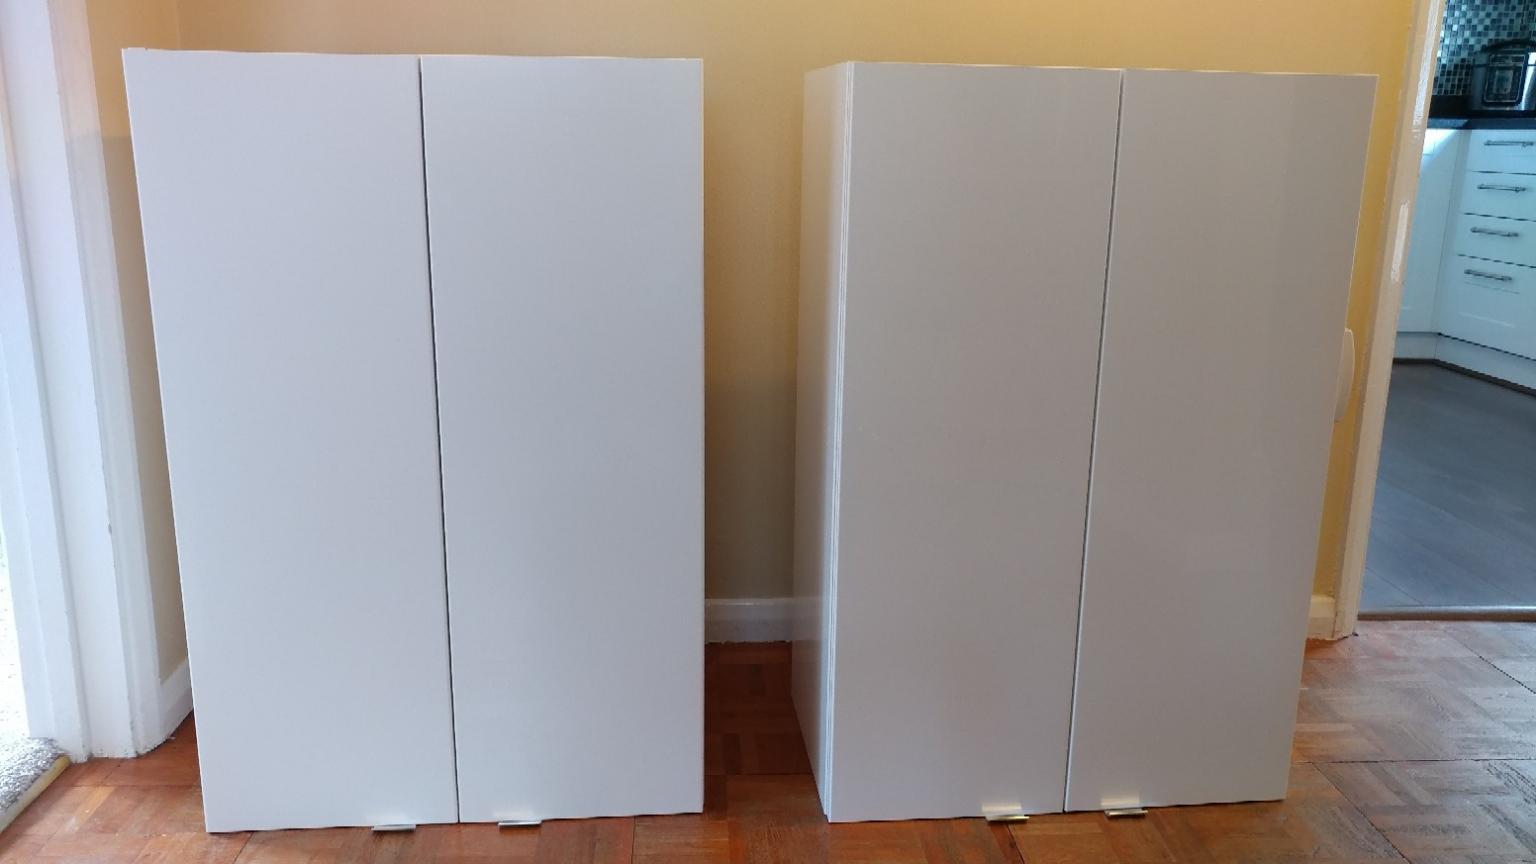 2 Cooke Lewis Imandra Deep Wall Cabinets In Gu52 Hart For